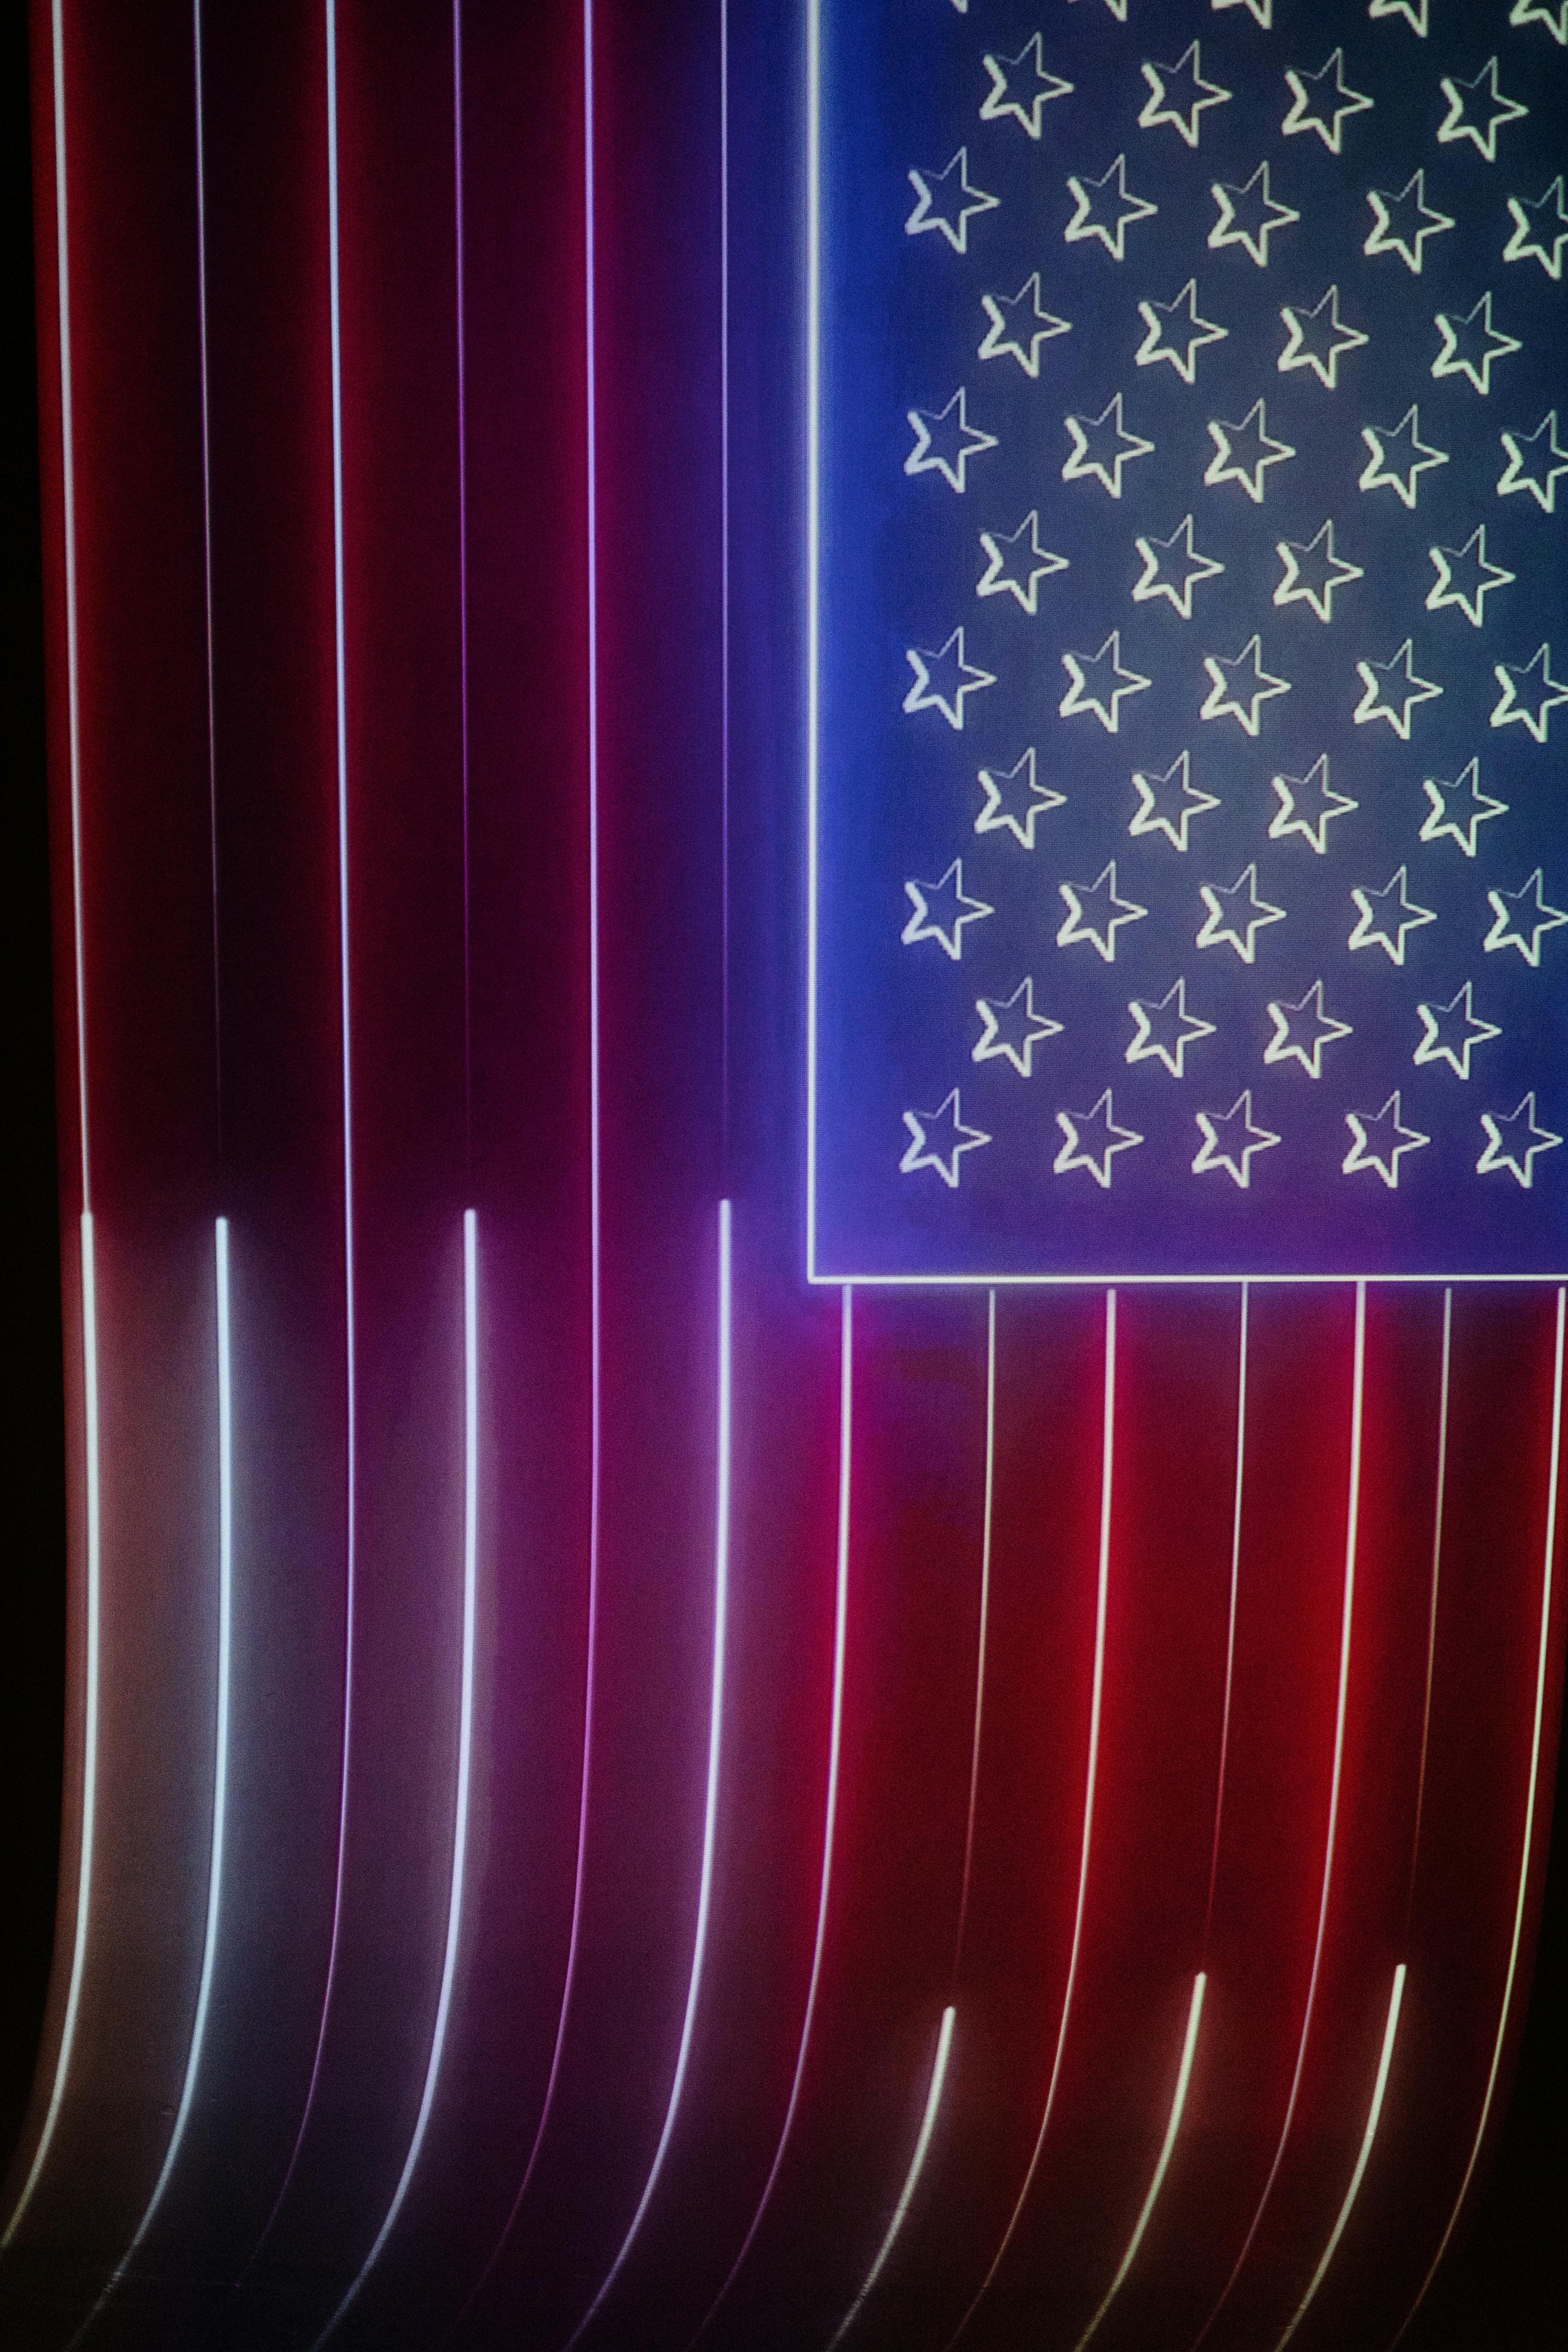 Free 4th Of July Backgrounds  Wallpaper Cave